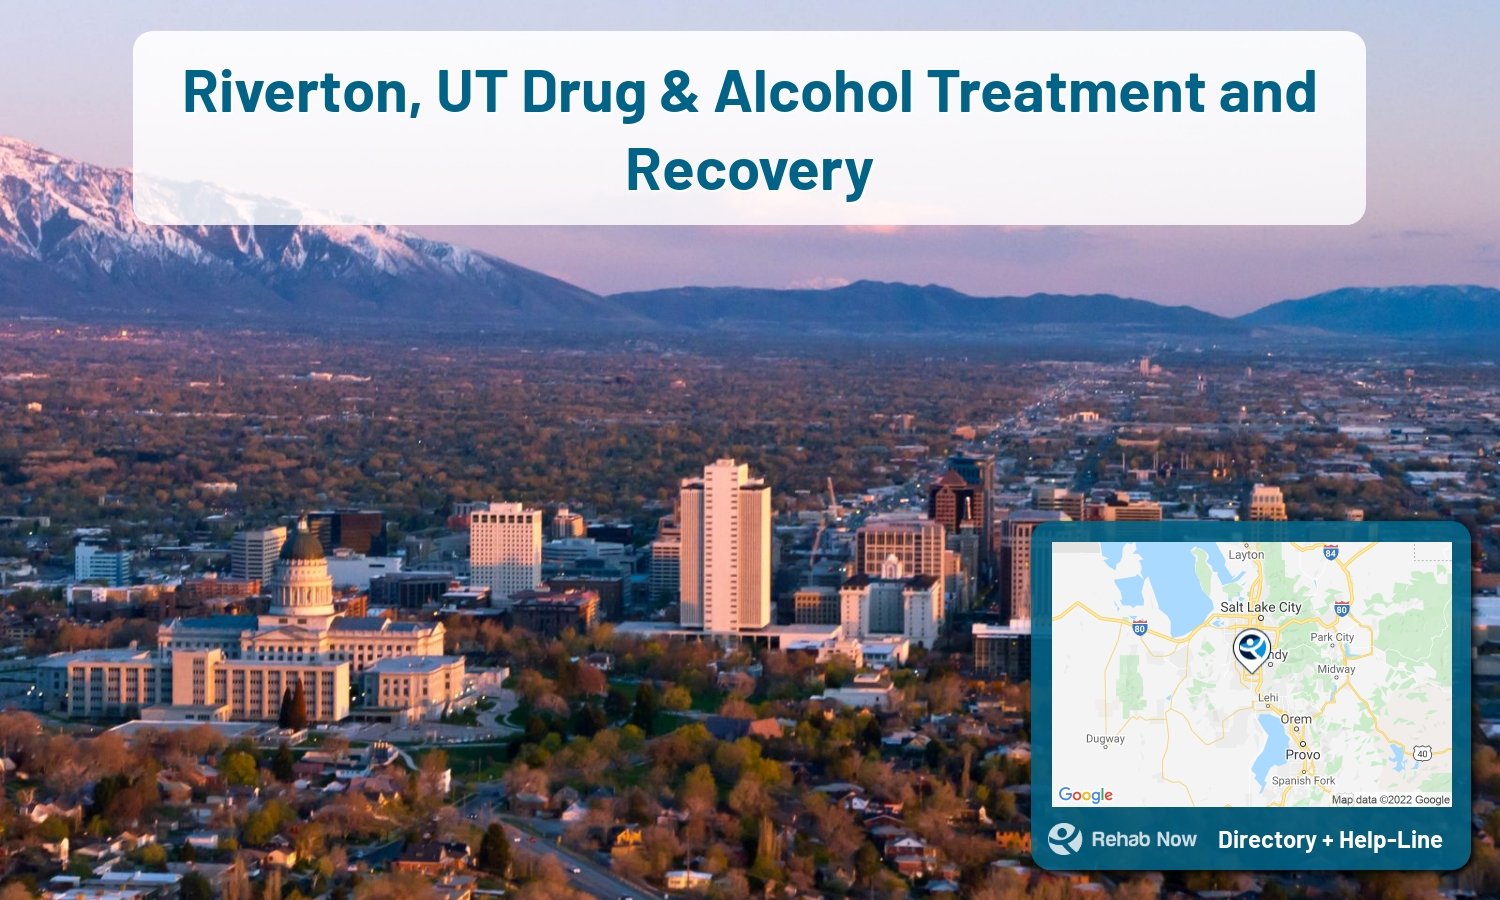 Riverton, UT Treatment Centers. Find drug rehab in Riverton, Utah, or detox and treatment programs. Get the right help now!